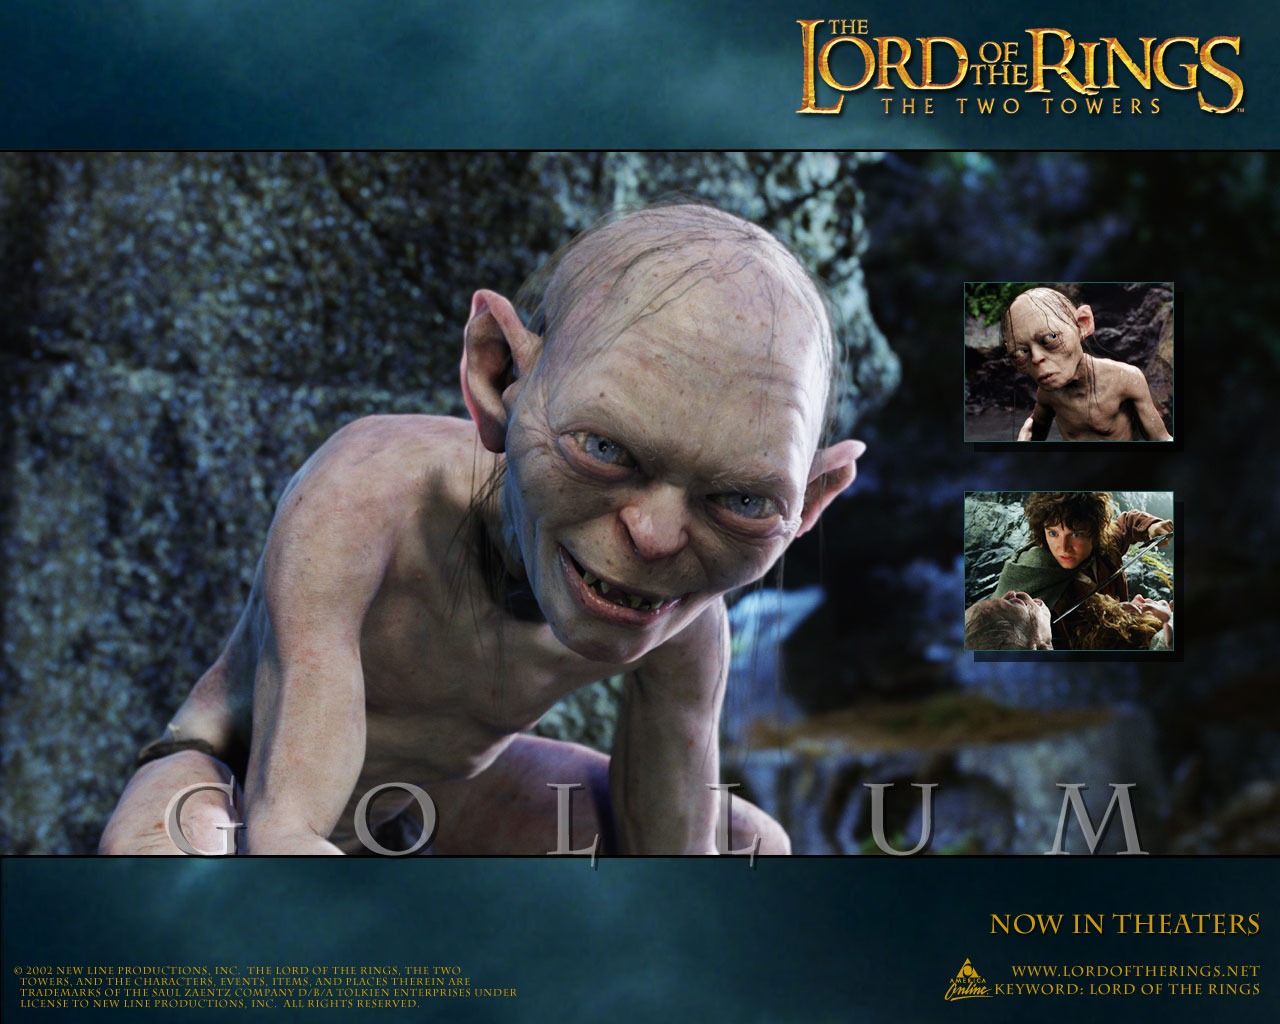 The Lord of the Rings wallpaper #7 - 1280x1024